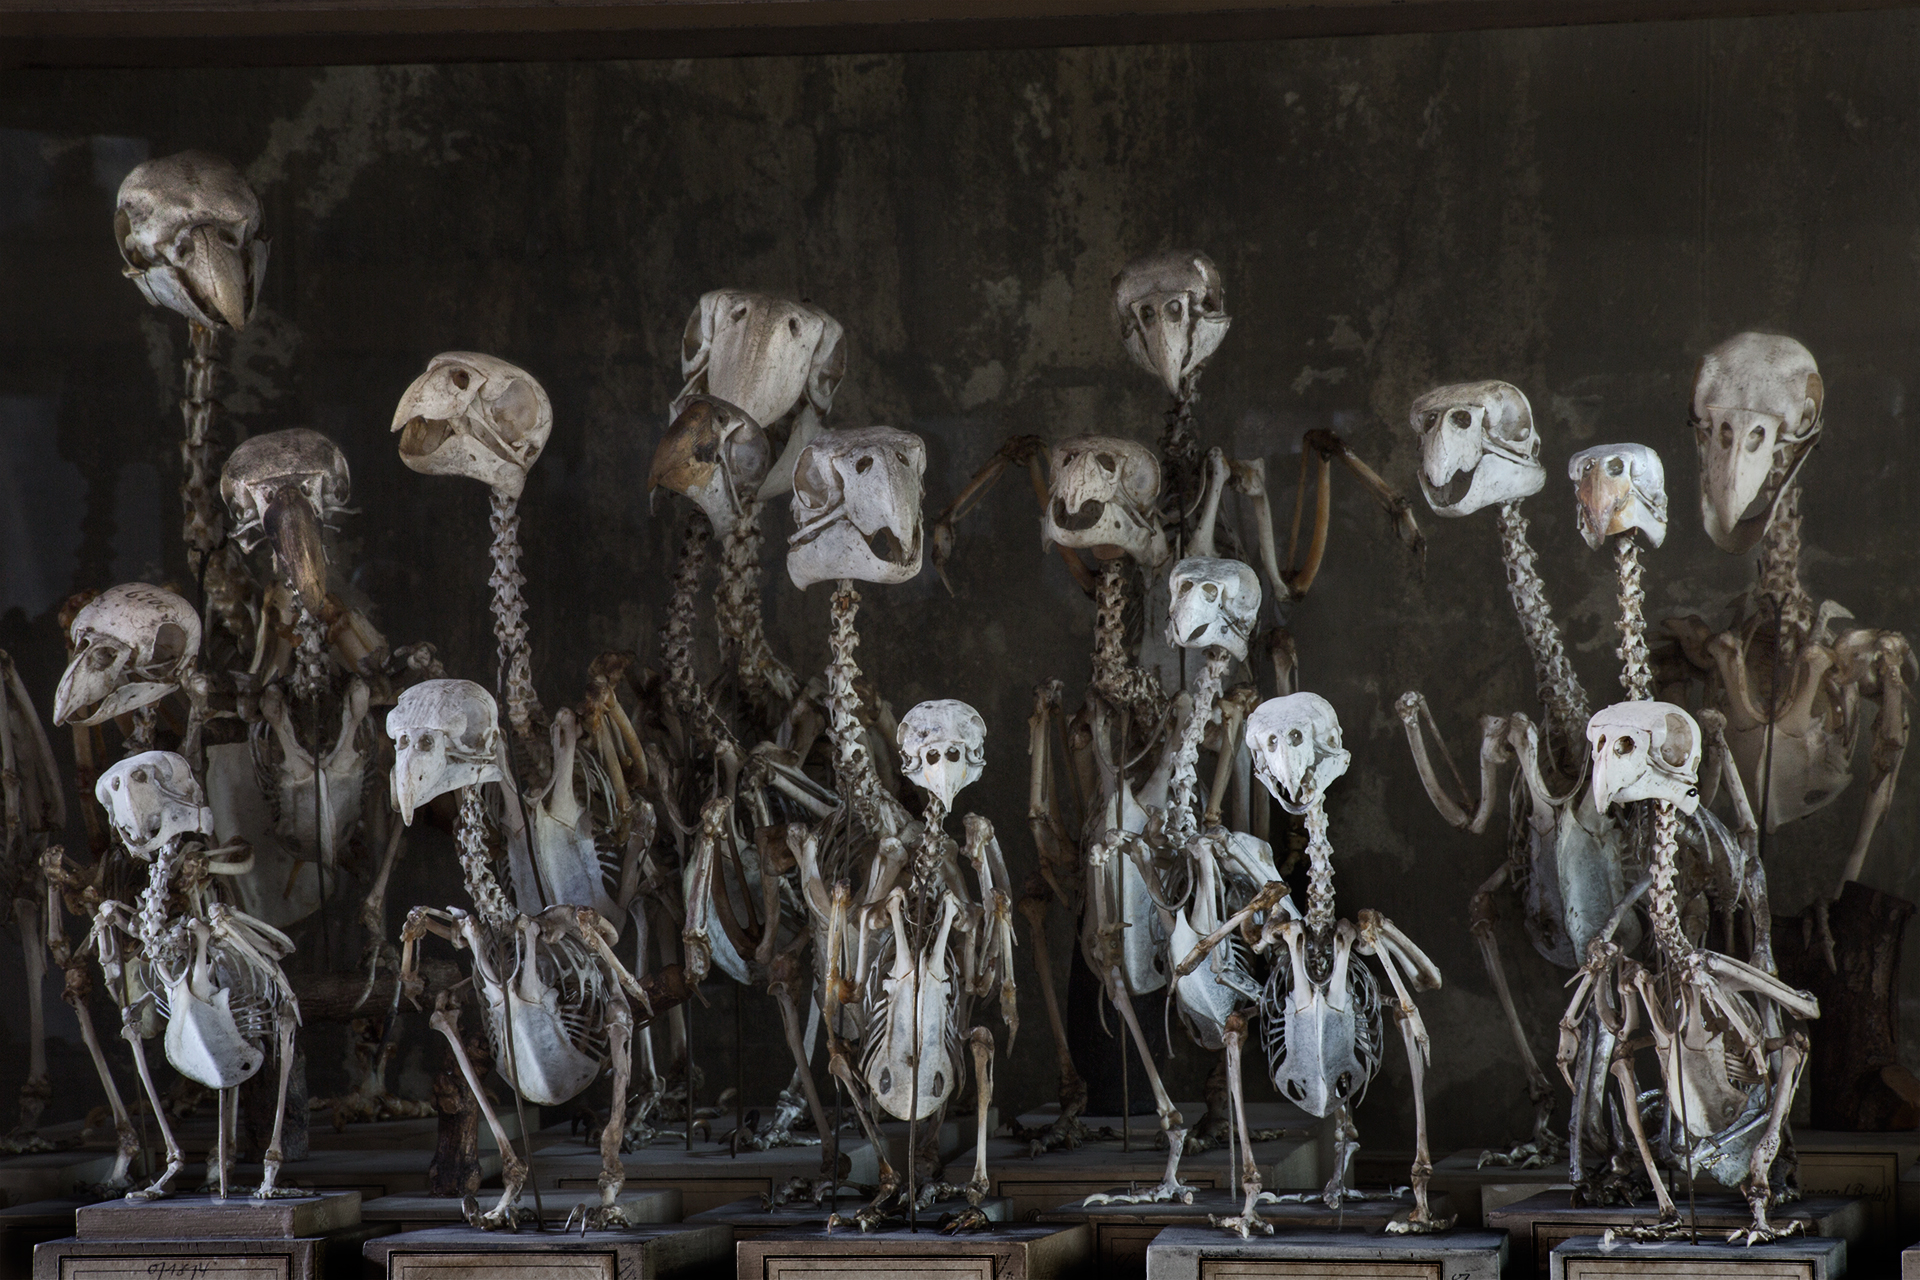  The storage vaults behind the scenes of the museum contain over 30 million specimen. These songbird and parrot skeletons in the so-called “bird hall” would feel equally at home in a haunted house, as they appear to retain a ghost of their living per